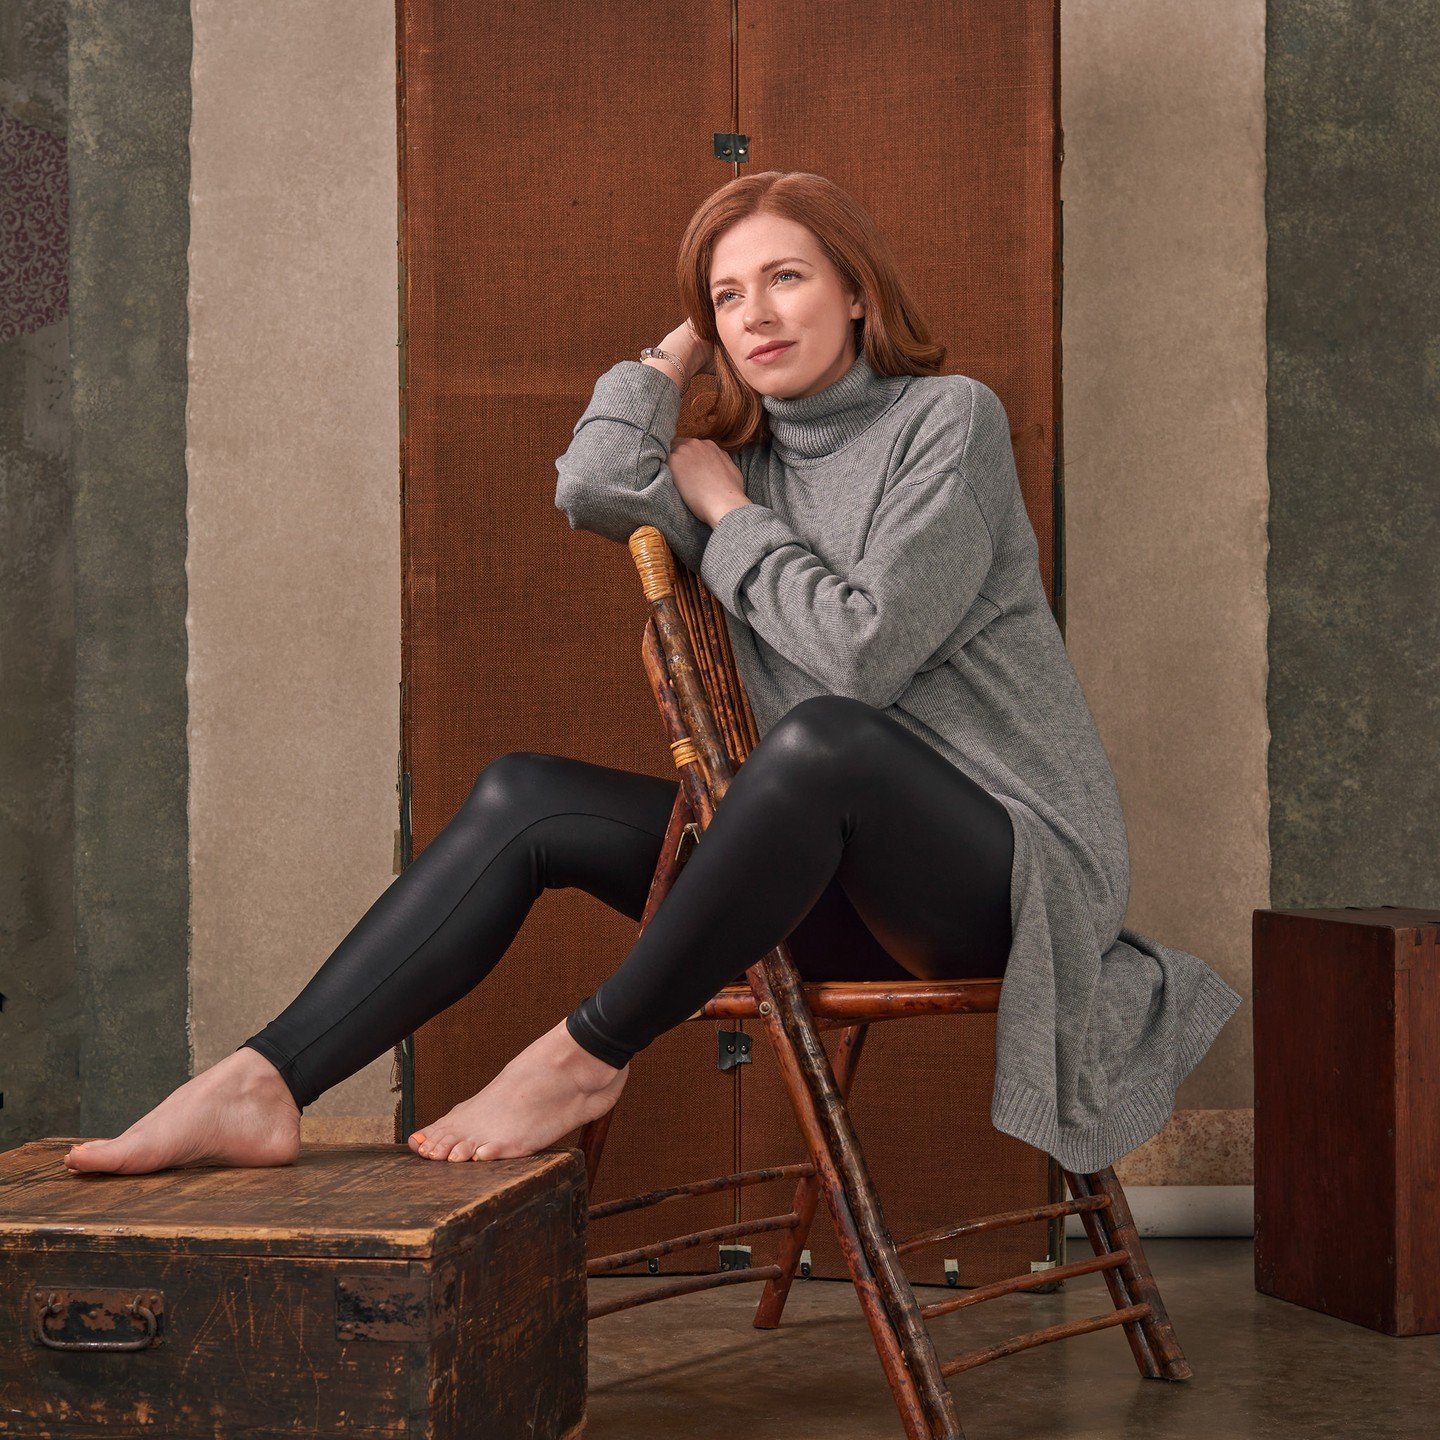 Look at this beautiful set design from @rojwhitelockphotography! This beautiful, earthy palette is a great match for the wardrobe and hair tone of his portrait subject. We love to see it!

#canvasbackdrops #modelportrait #studioshoot #paintedcanvasba